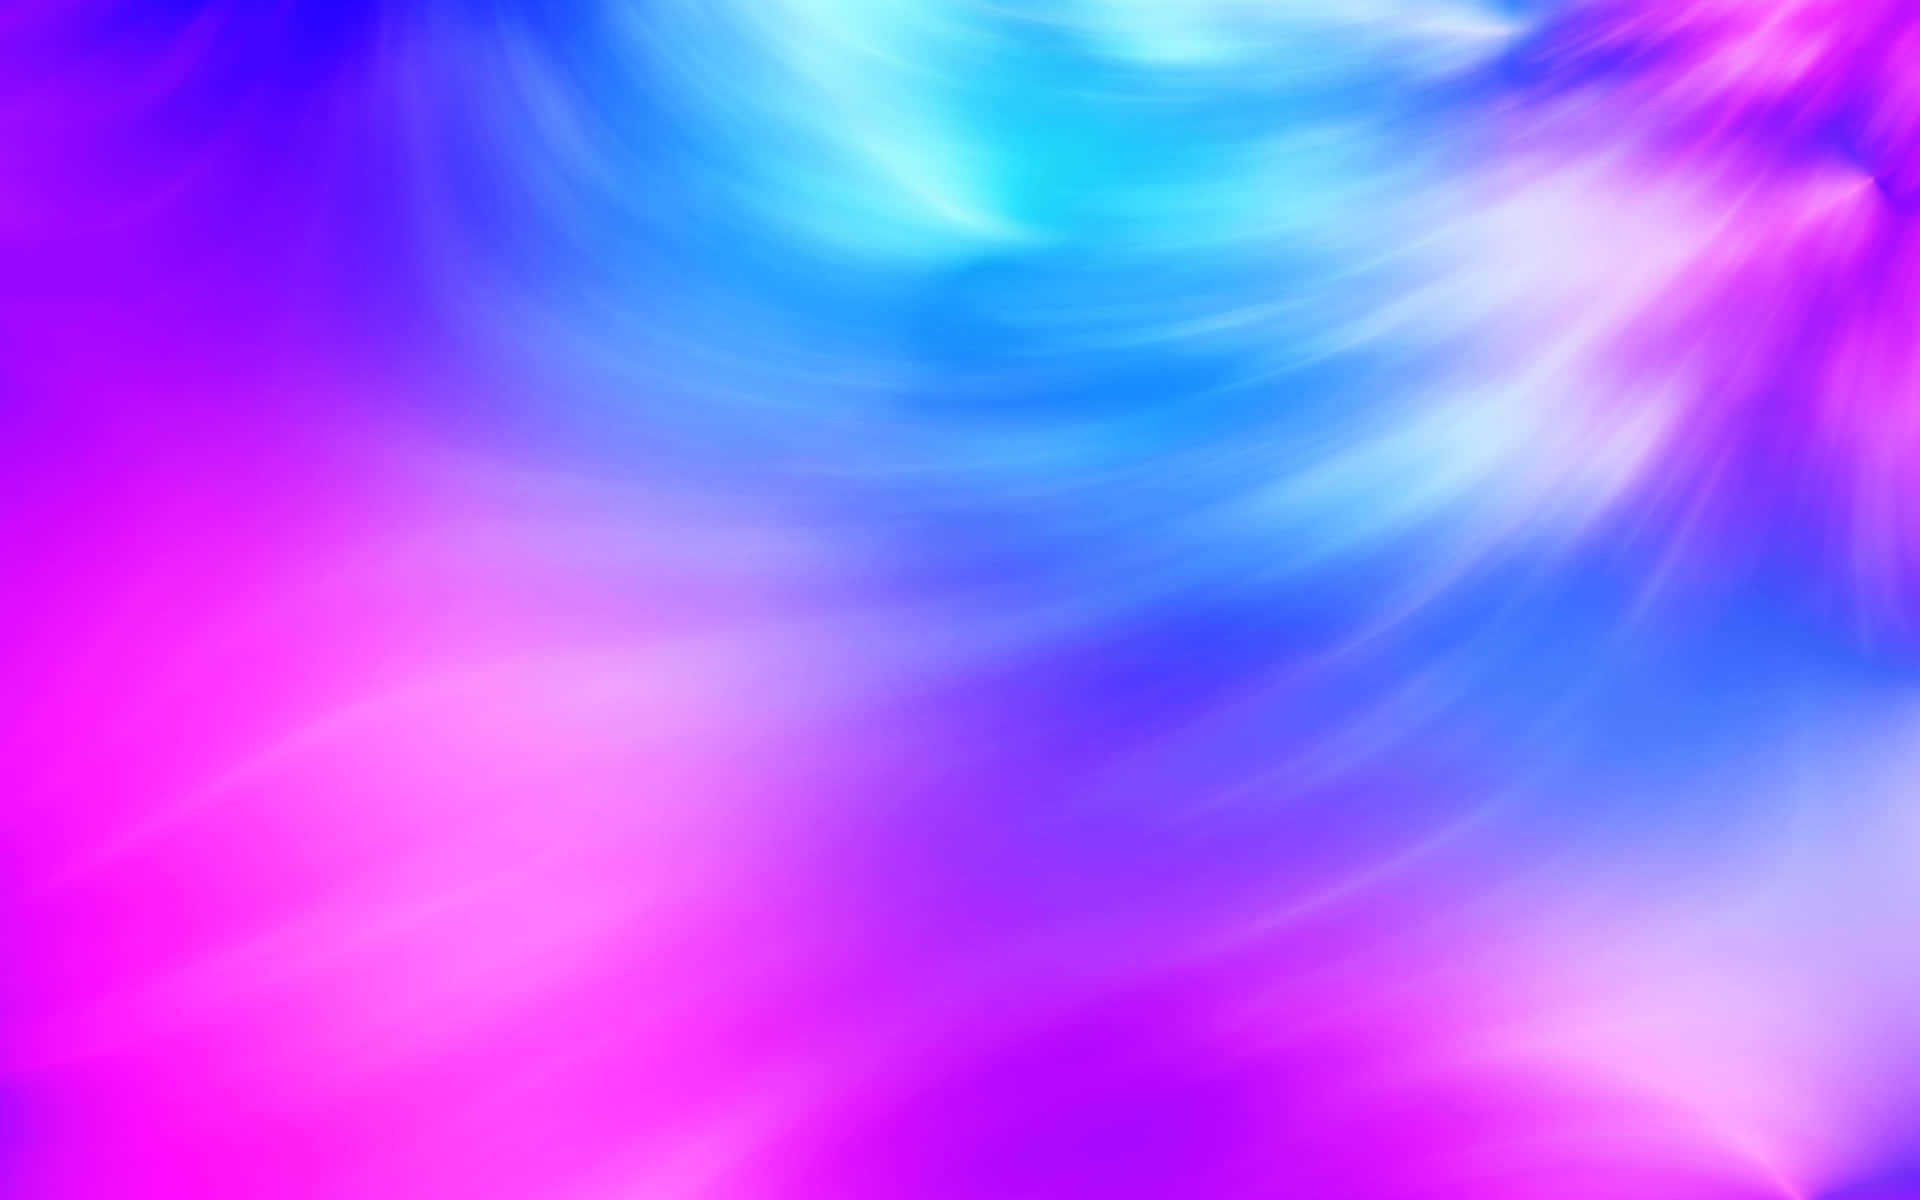 Blue Ombre Background Splash Effect With Violet And Blue Tones